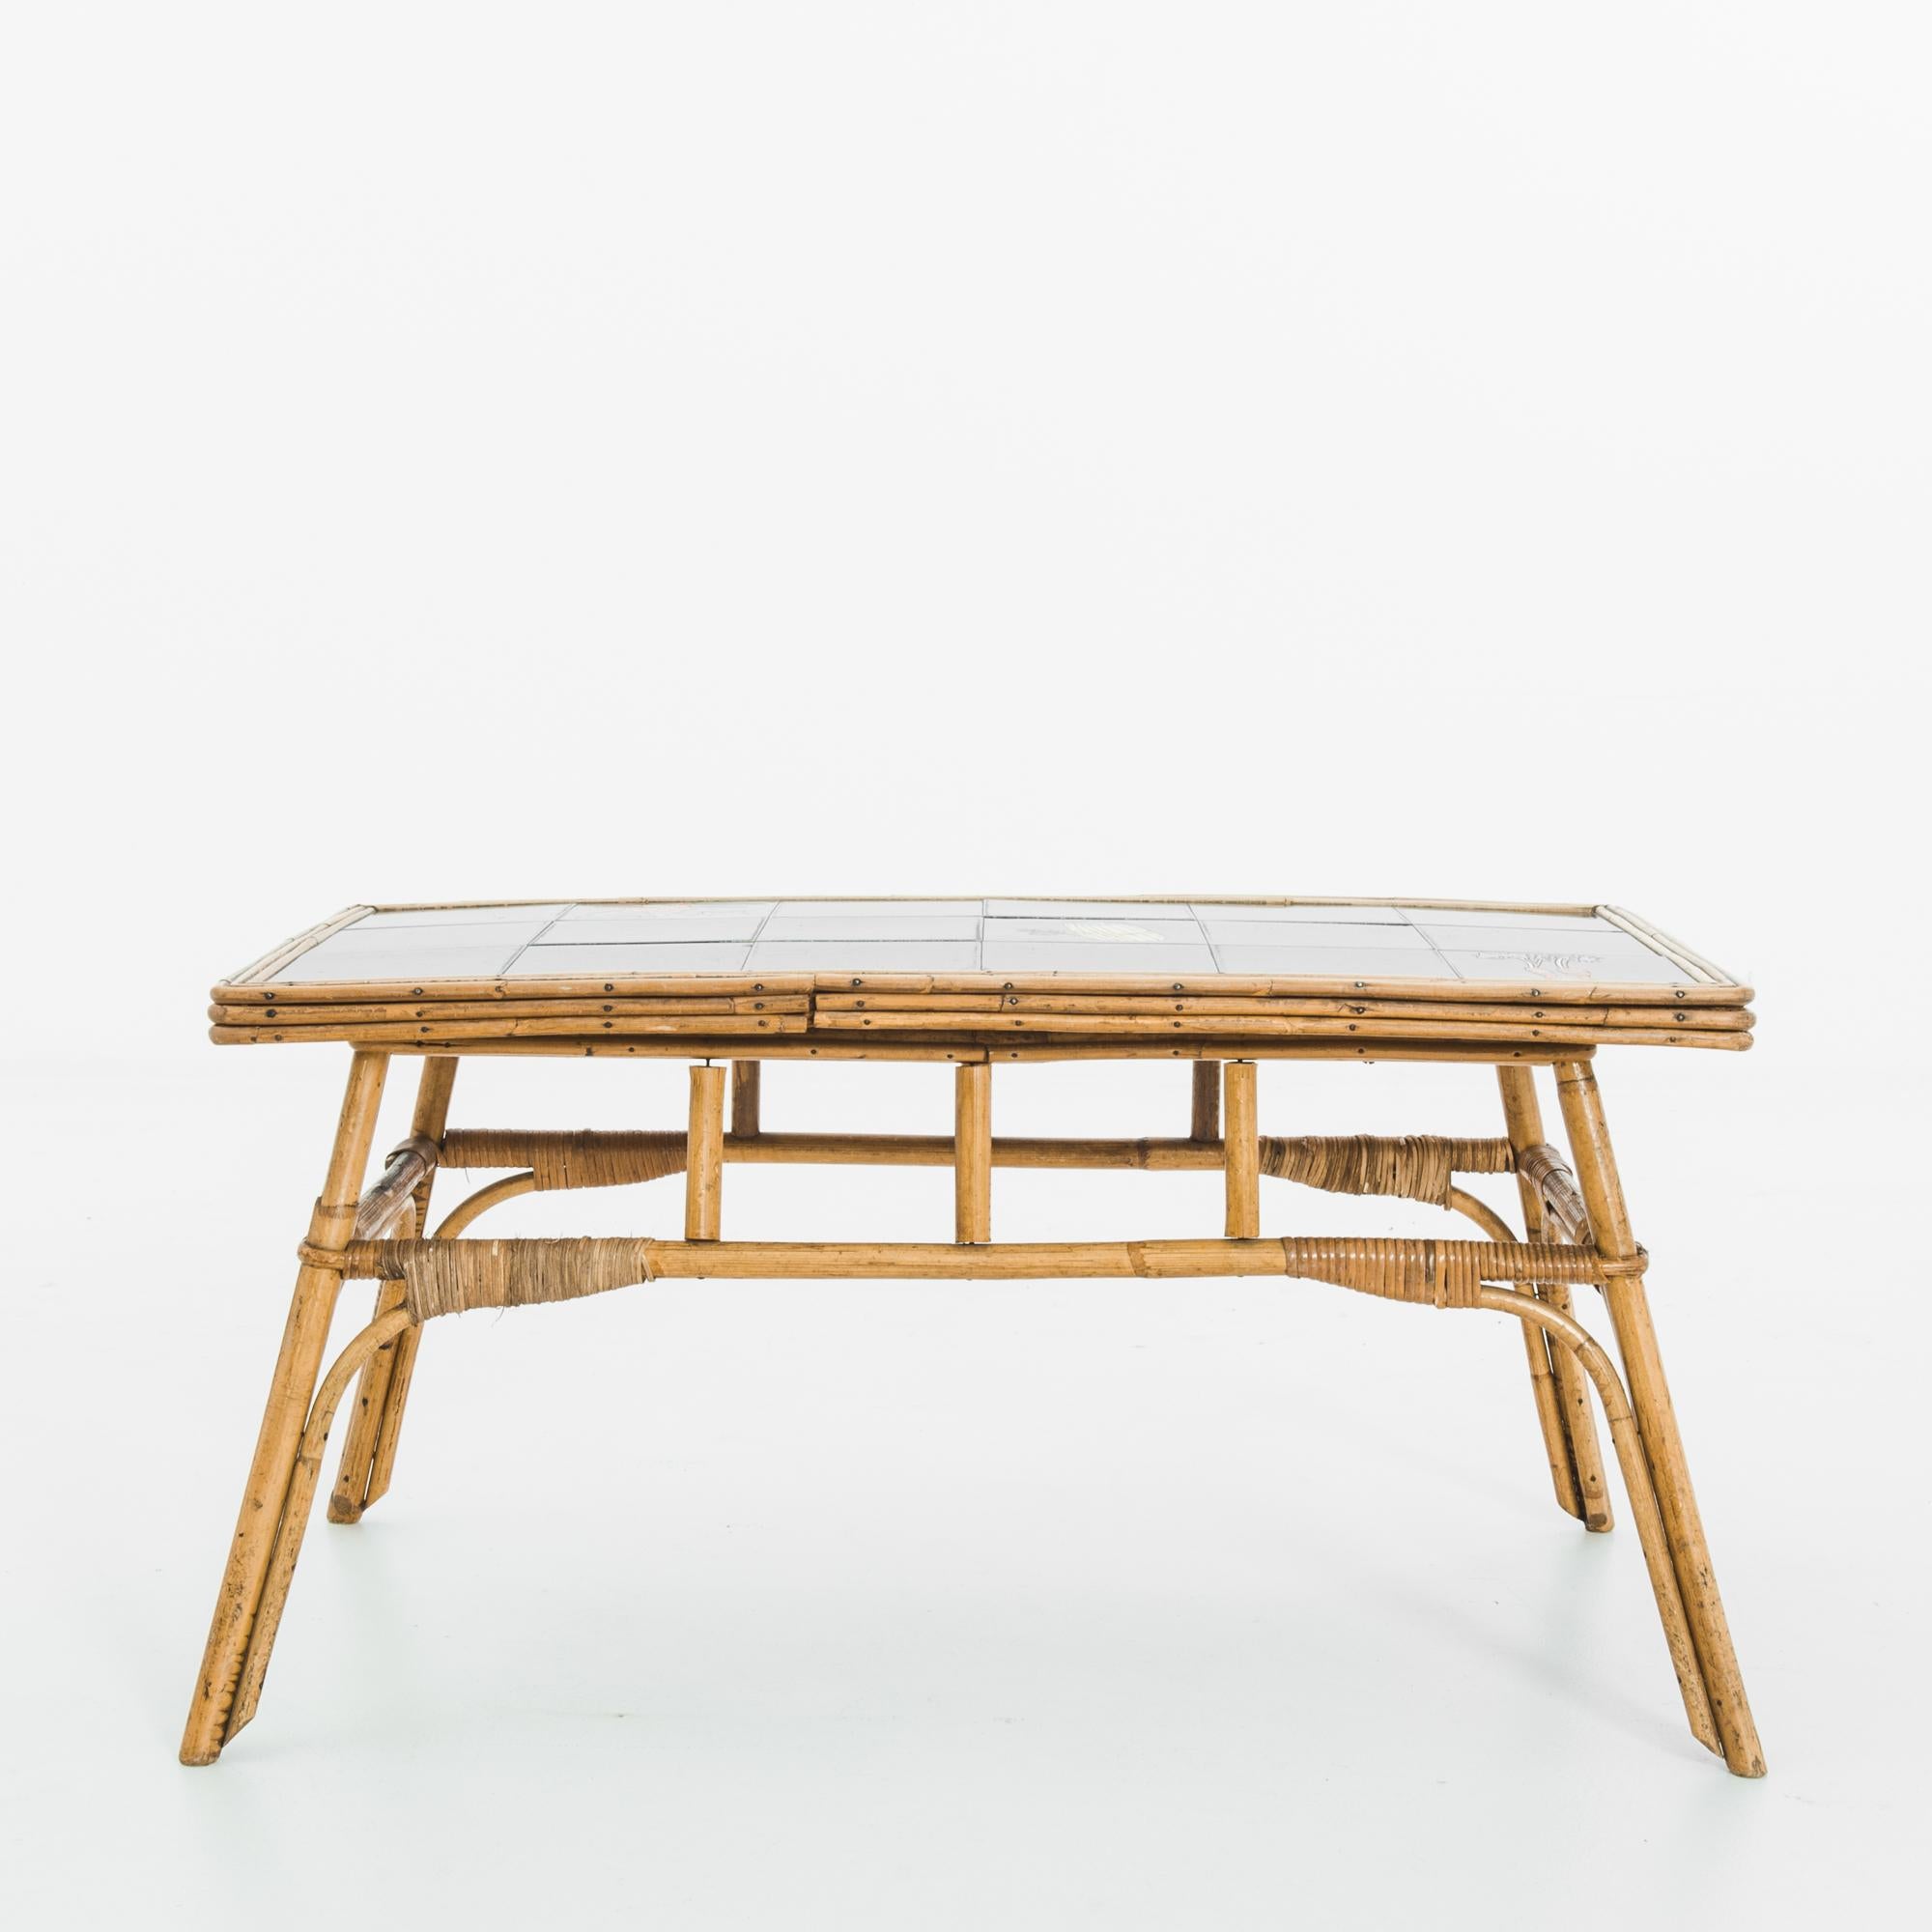 A bamboo coffee table from 1960s France, with a tiled top. The bamboo frame is light and angular, with a pleasing warm patina. Black ceramic tiles, punctuated with graphic red, green and yellow motifs — a pair of radishes, a bunch of asparagus,